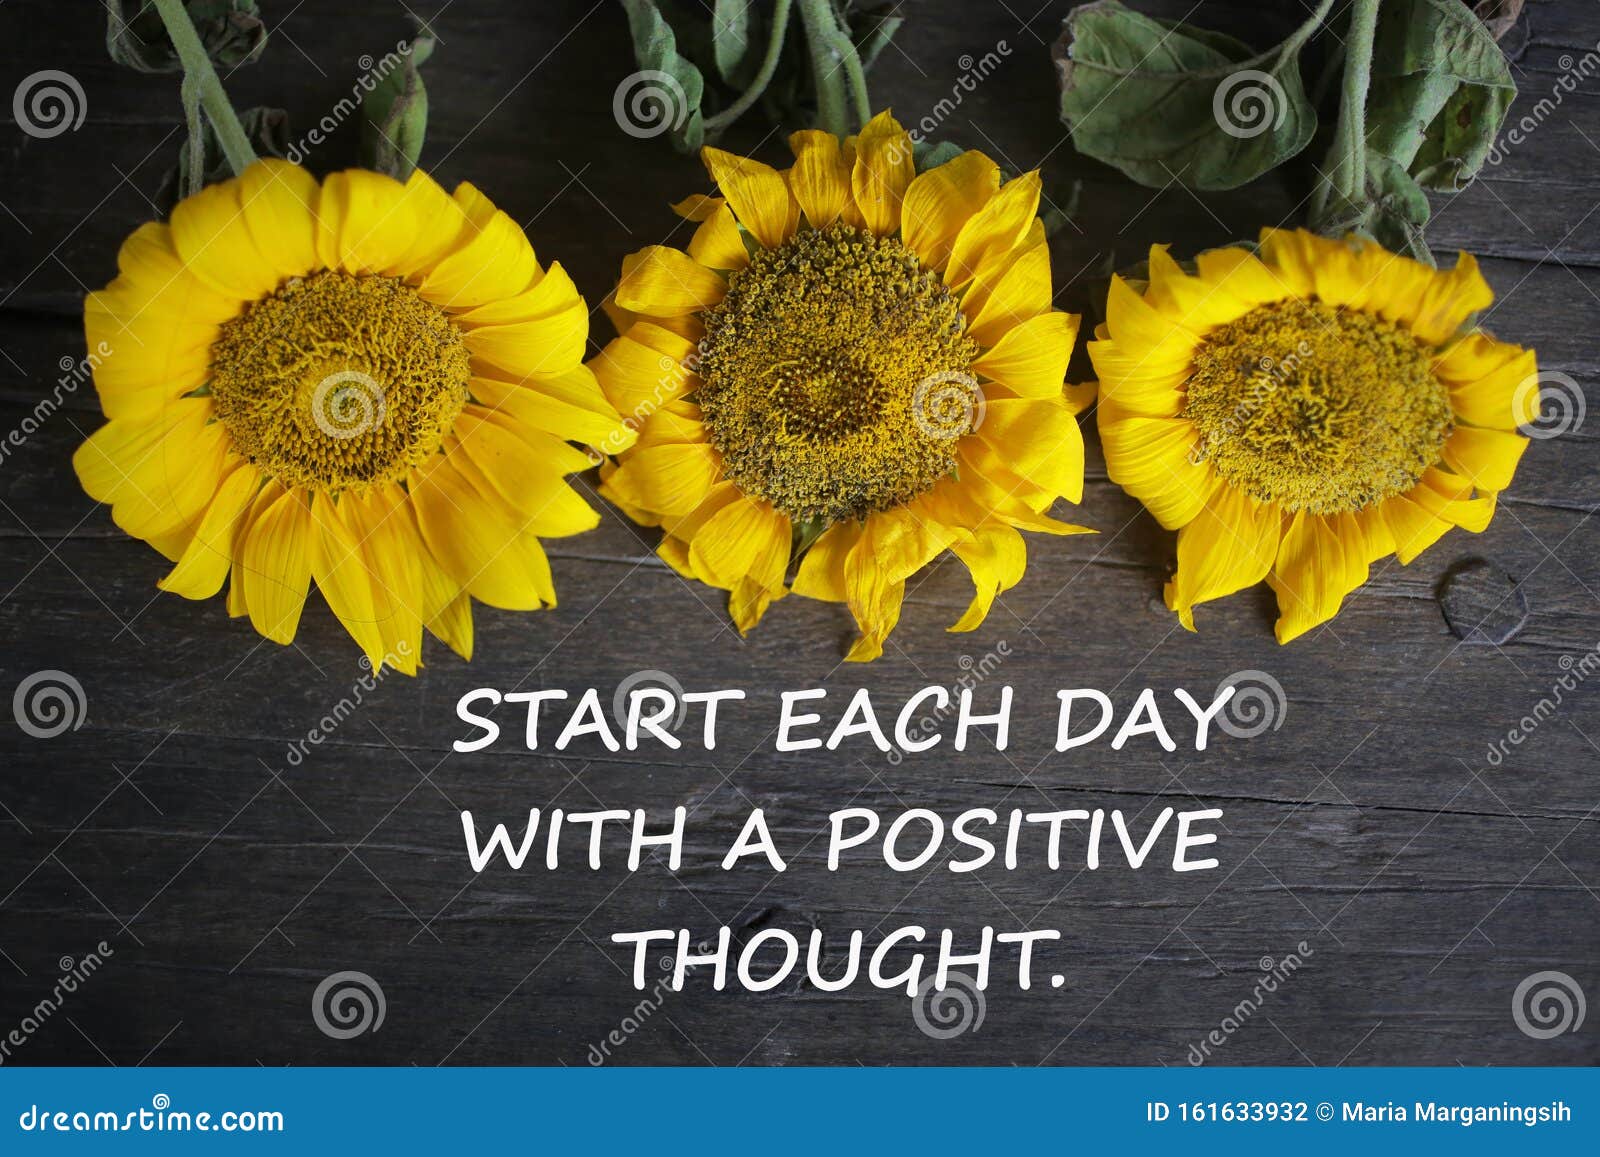 inspirational motivational quote - start each day with a positive thought. with yellow sun flowers on rustic wooden table